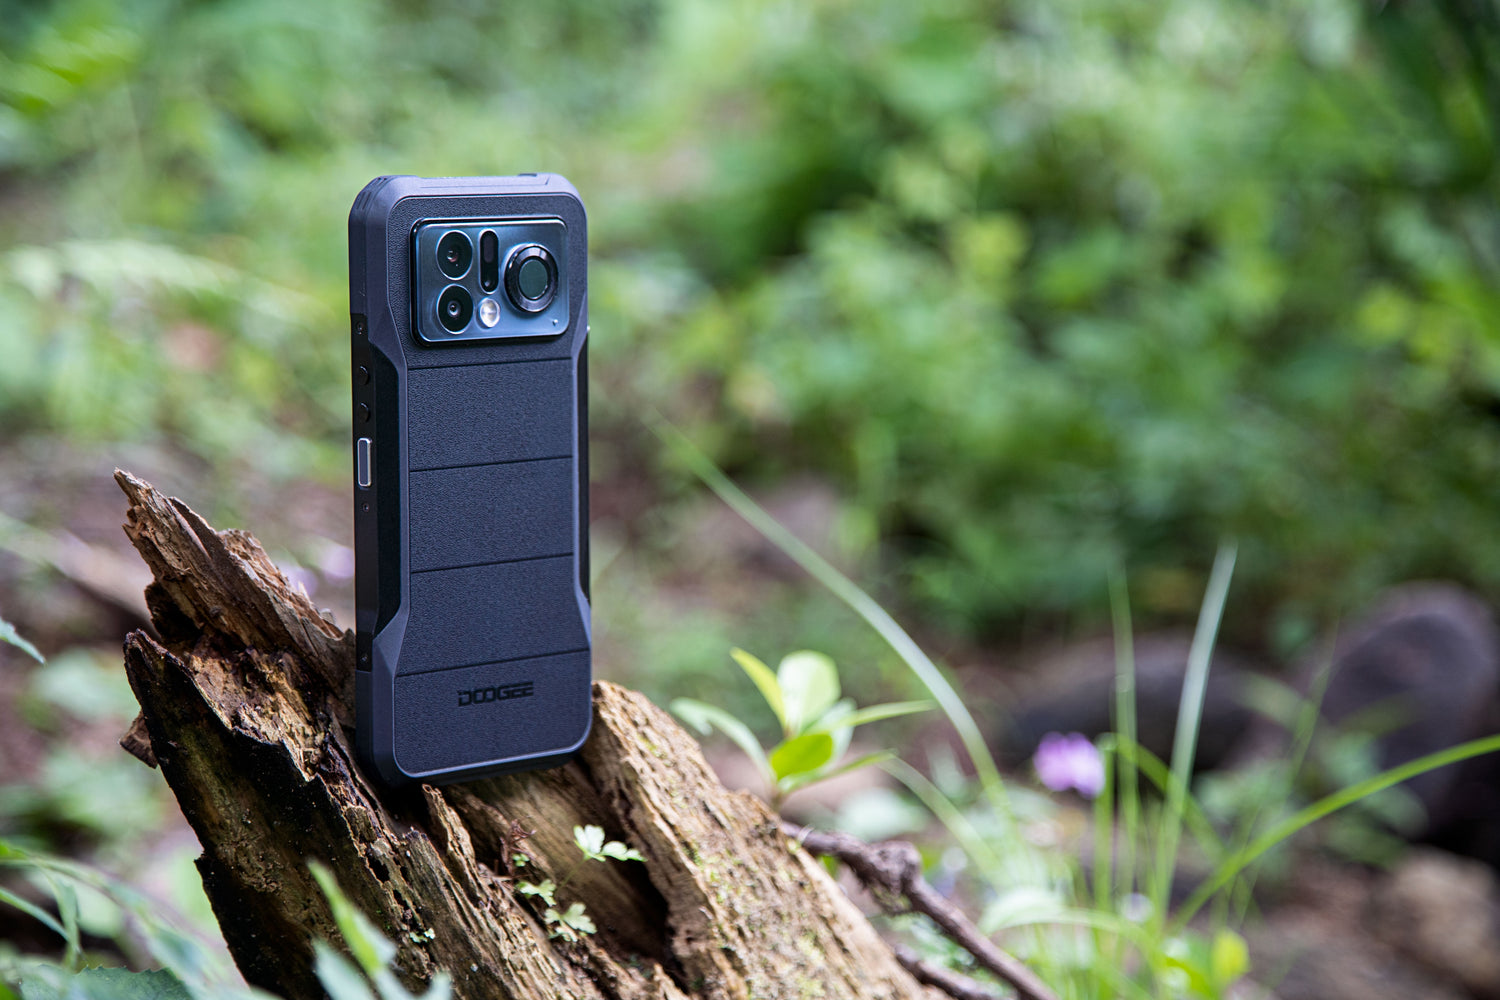 The Amazing Doogee V20 Pro Rugged Phone With AMOLED Display And Thermal Imaging Is Now On Sale